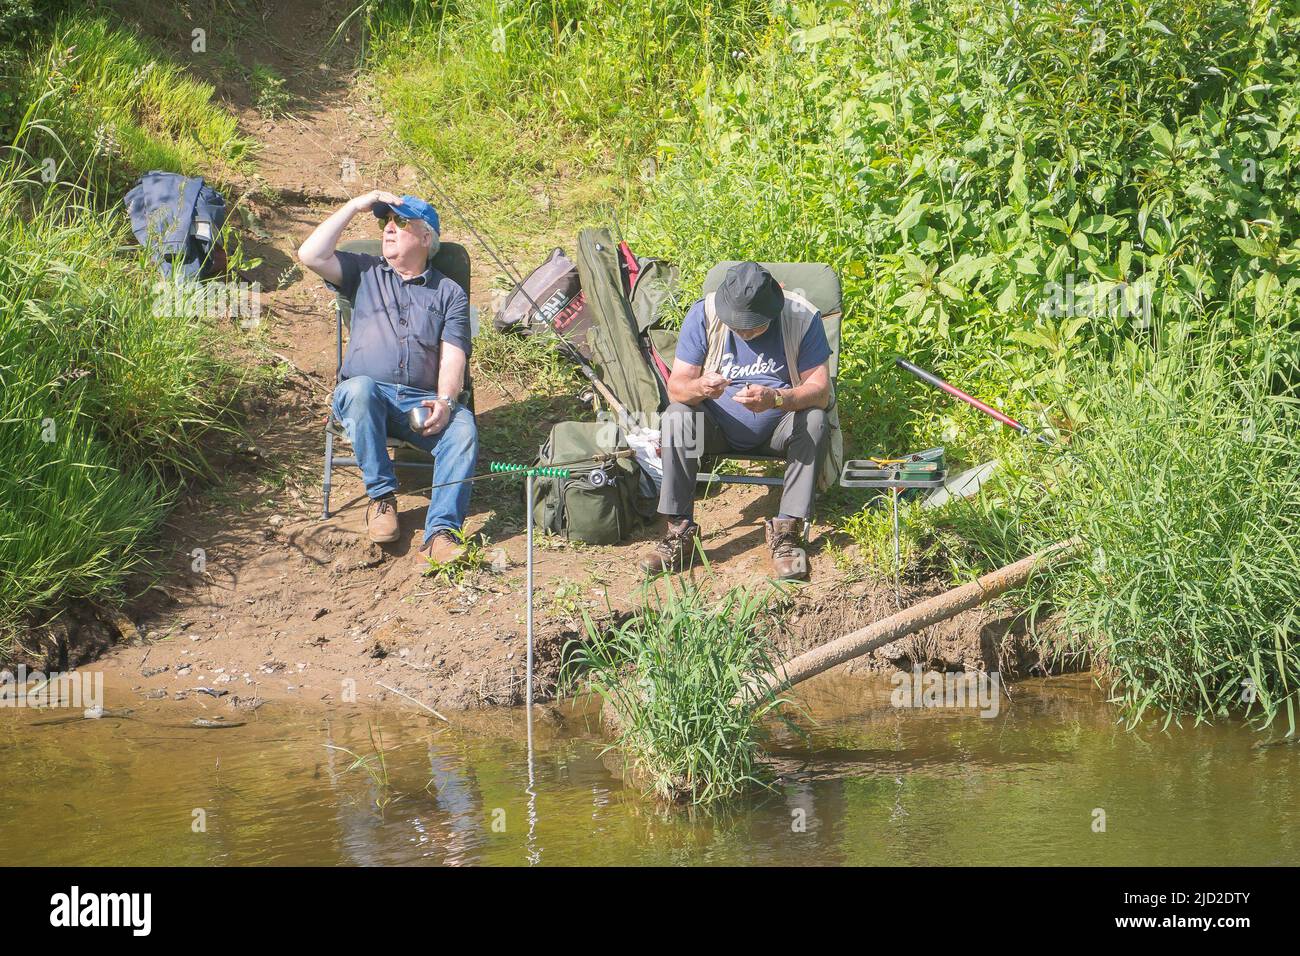 Arley, UK. 17th June, 2022. UK weather: very warm temperatures and bright skies offer the perfect time for a little fishing. Two men sit along a riverside relaxing with fishing rods in the river. Credit: Lee Hudson/Alamy Live News Stock Photo